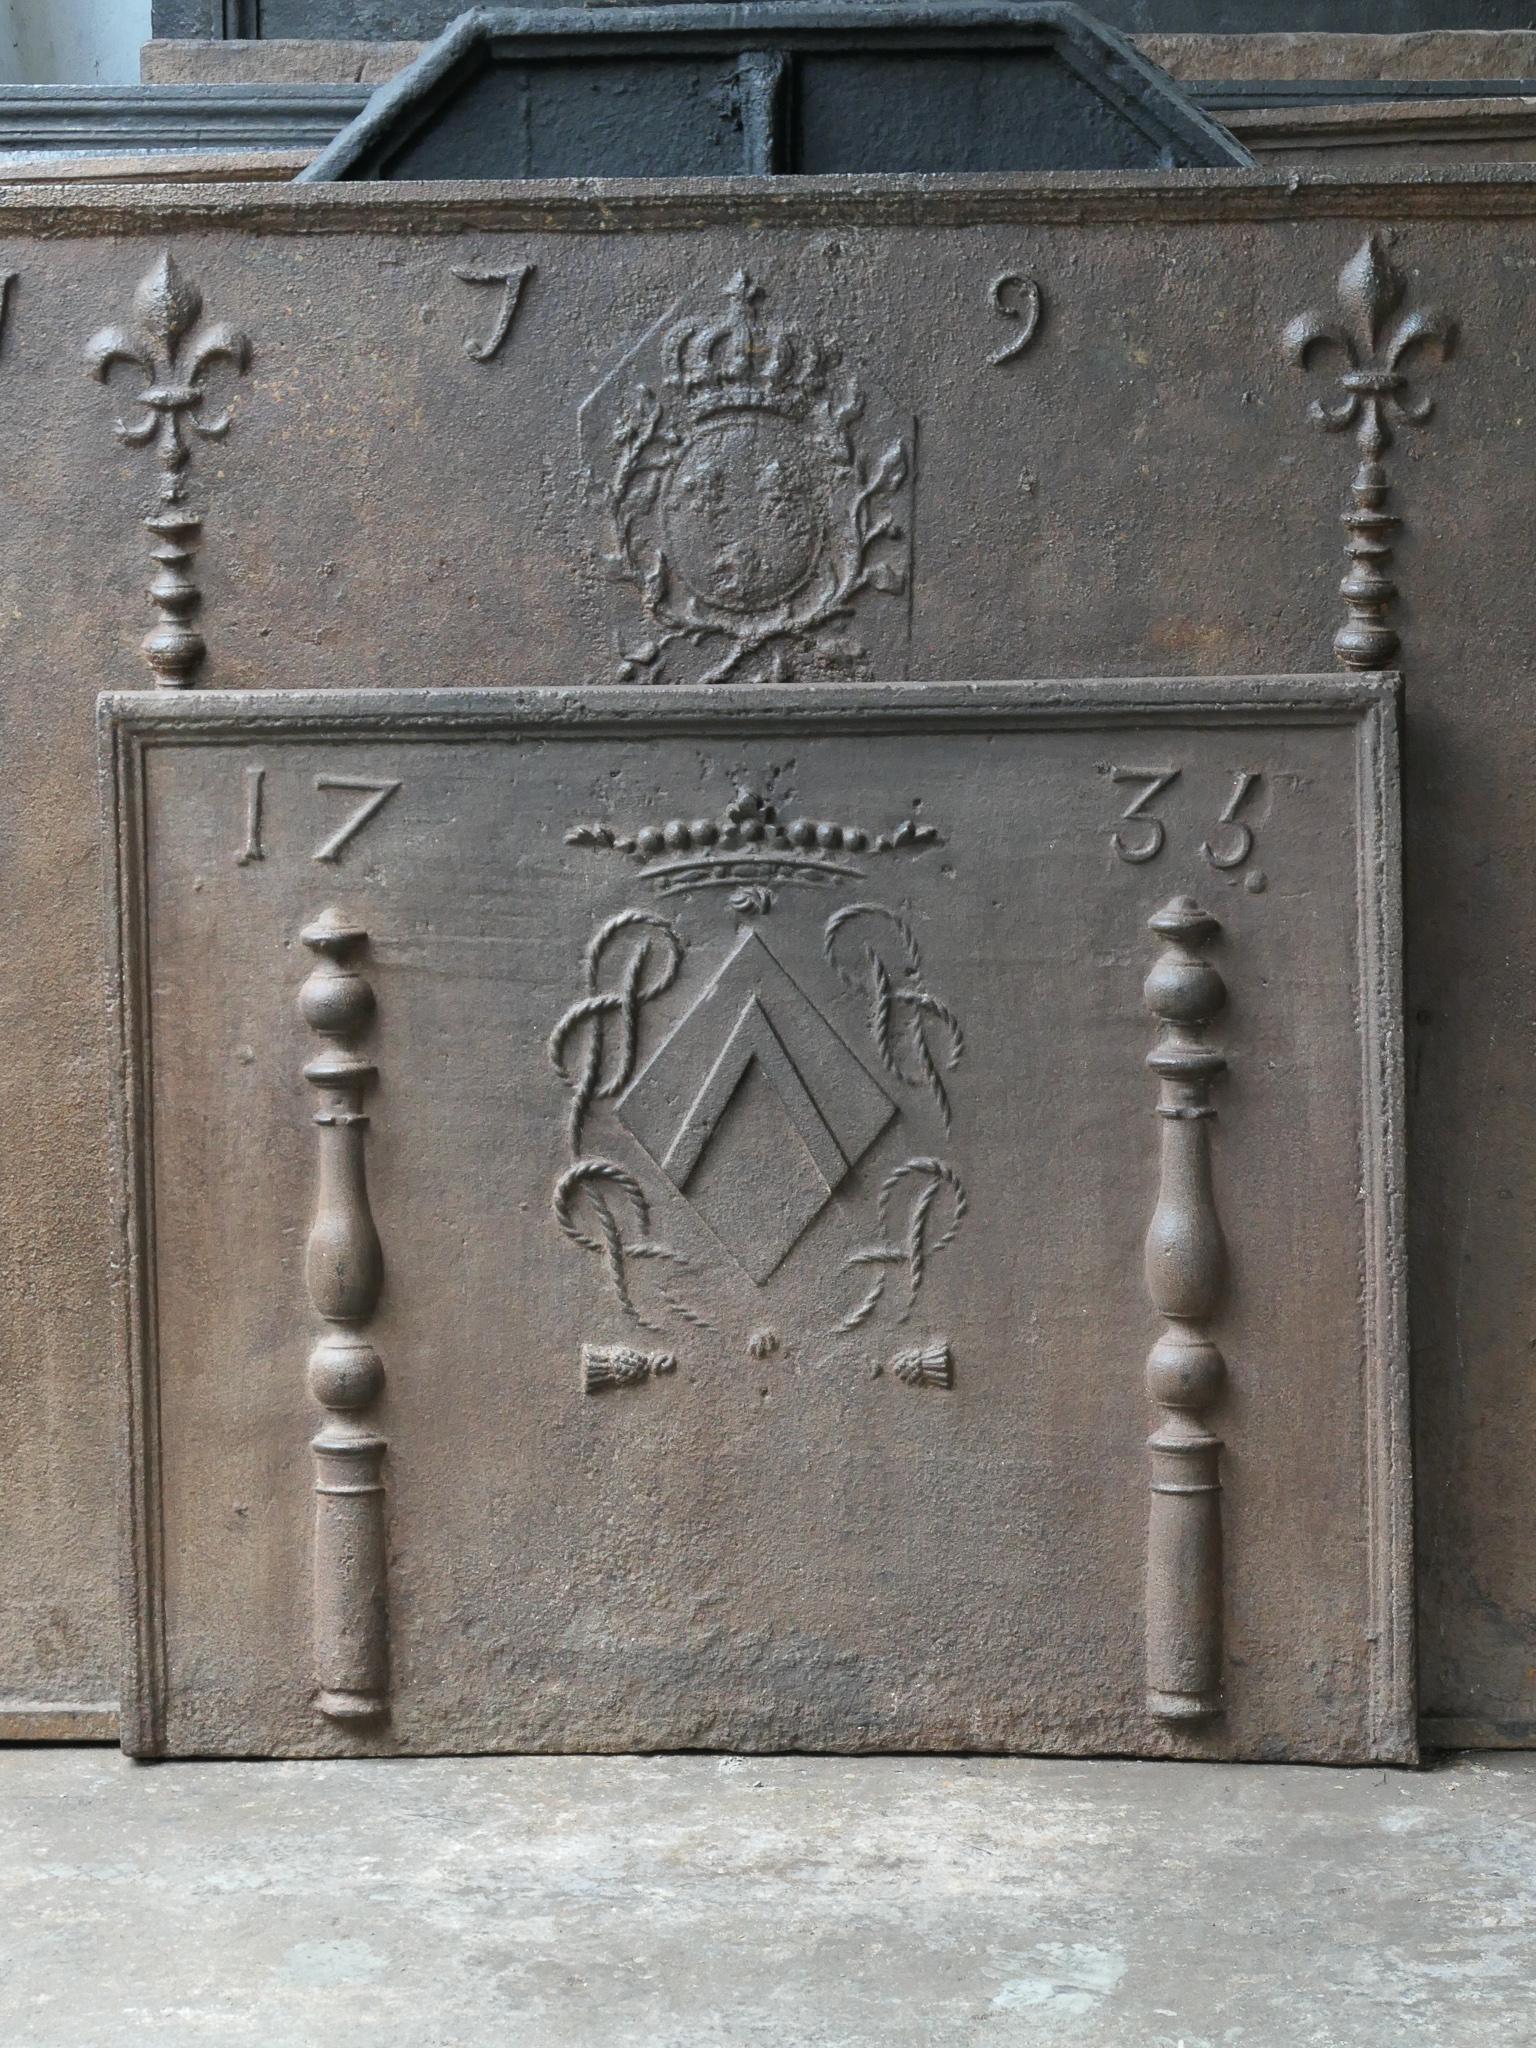 French Louis XIV period fireback with a coat of arms. The coat of arms is flanked by two pillars, which refer to the club of Hercules. They stand for strength and the unknown. The date of production, 1735, is also cast in the fireback. 

The